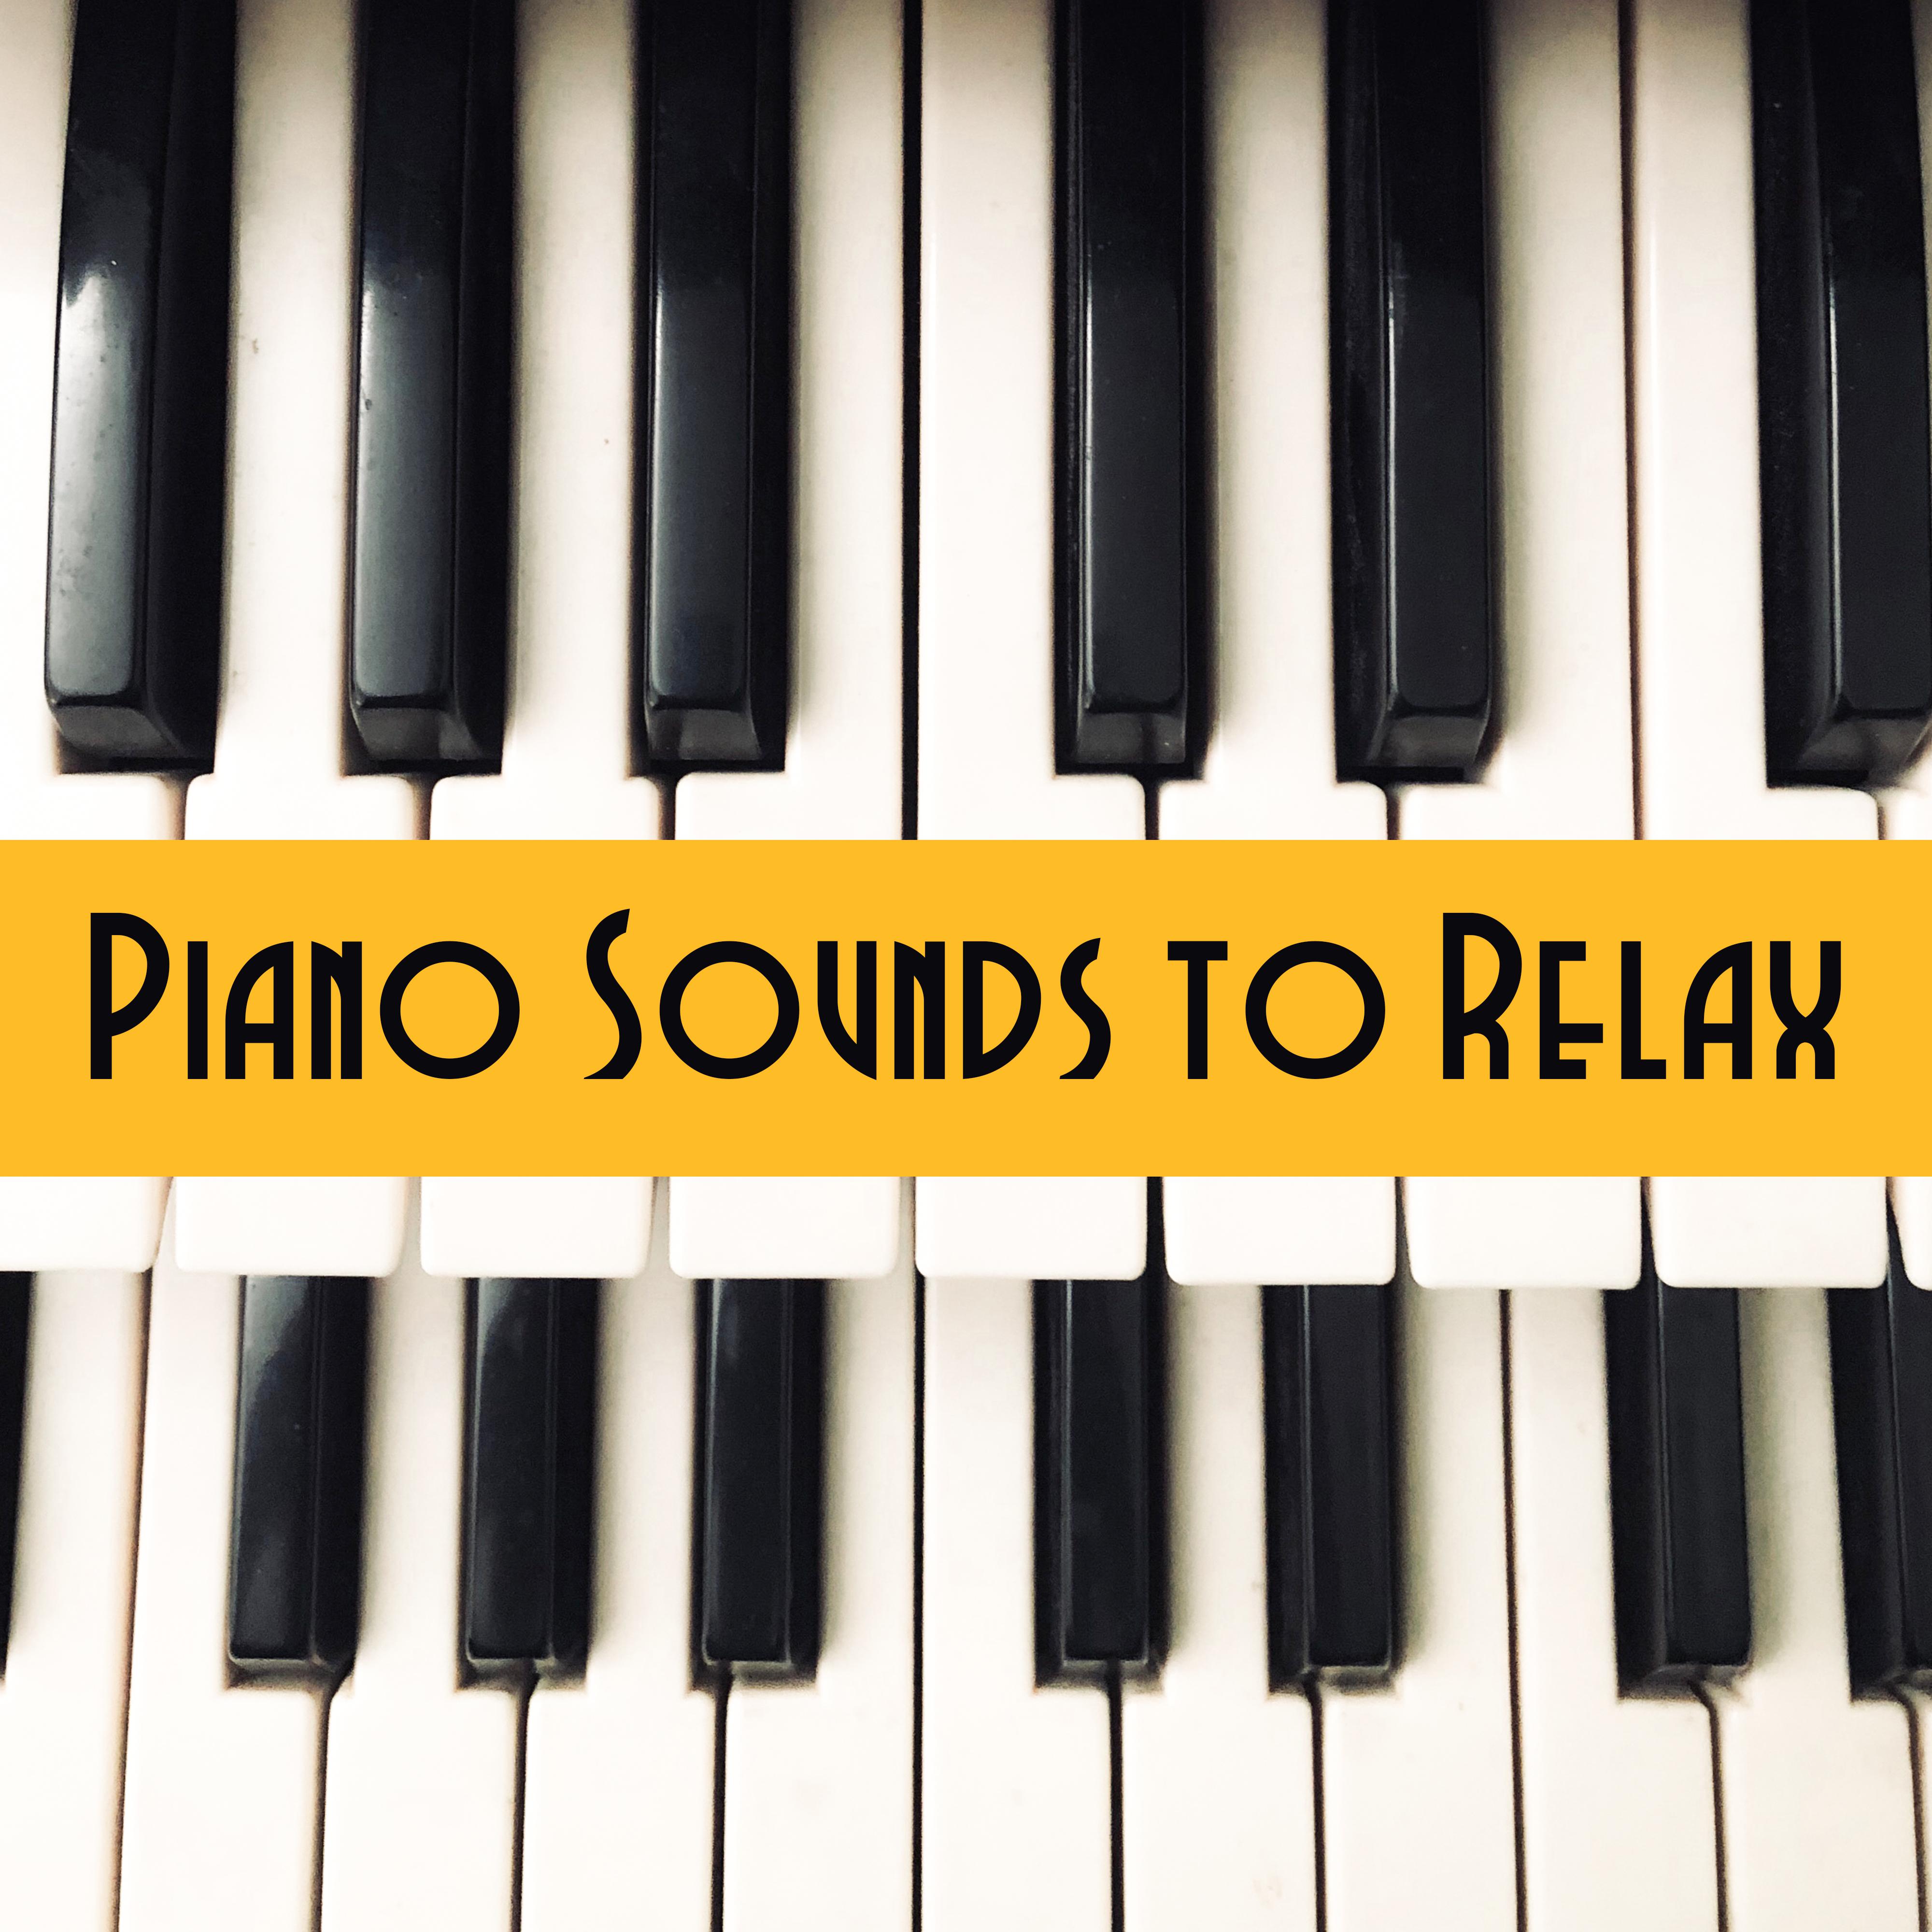 Piano Sounds to Relax